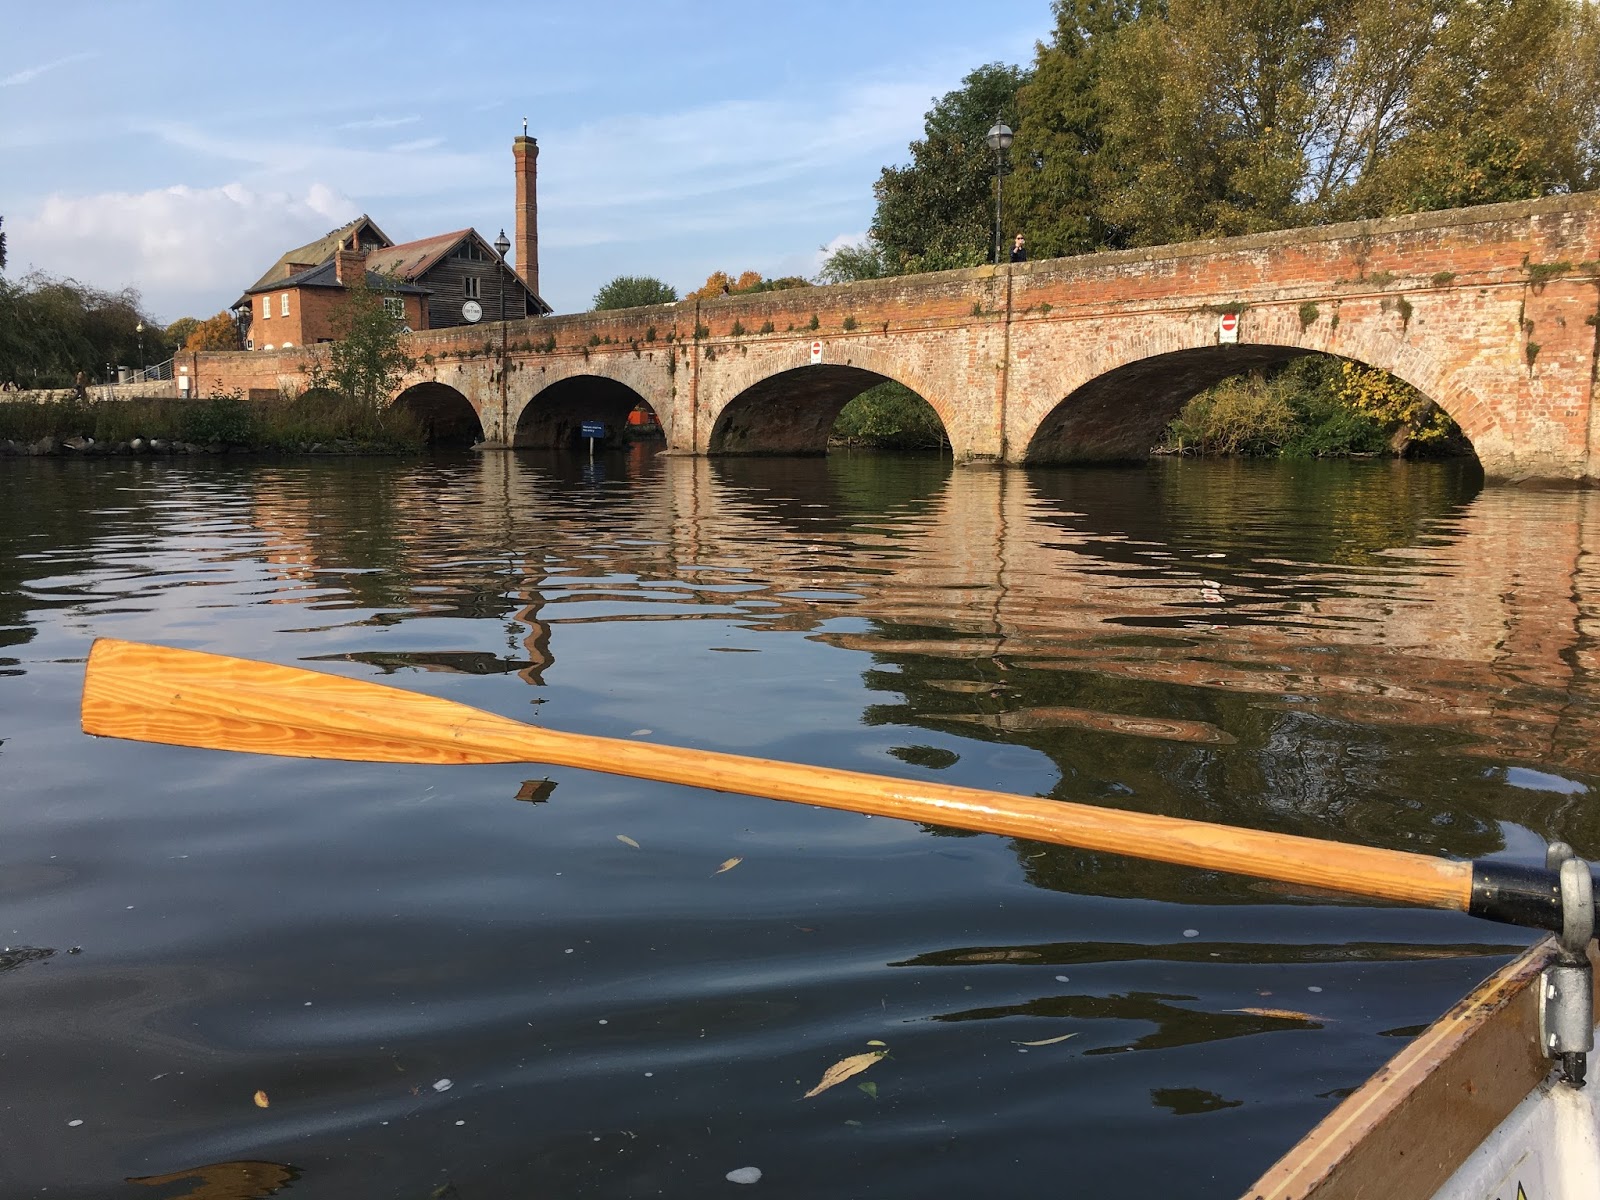 Rowing boats \ River Avon \ Stratford Upon Avon \ Travel \ Priceless Life of Mine \ Over 40 lifestyle blog